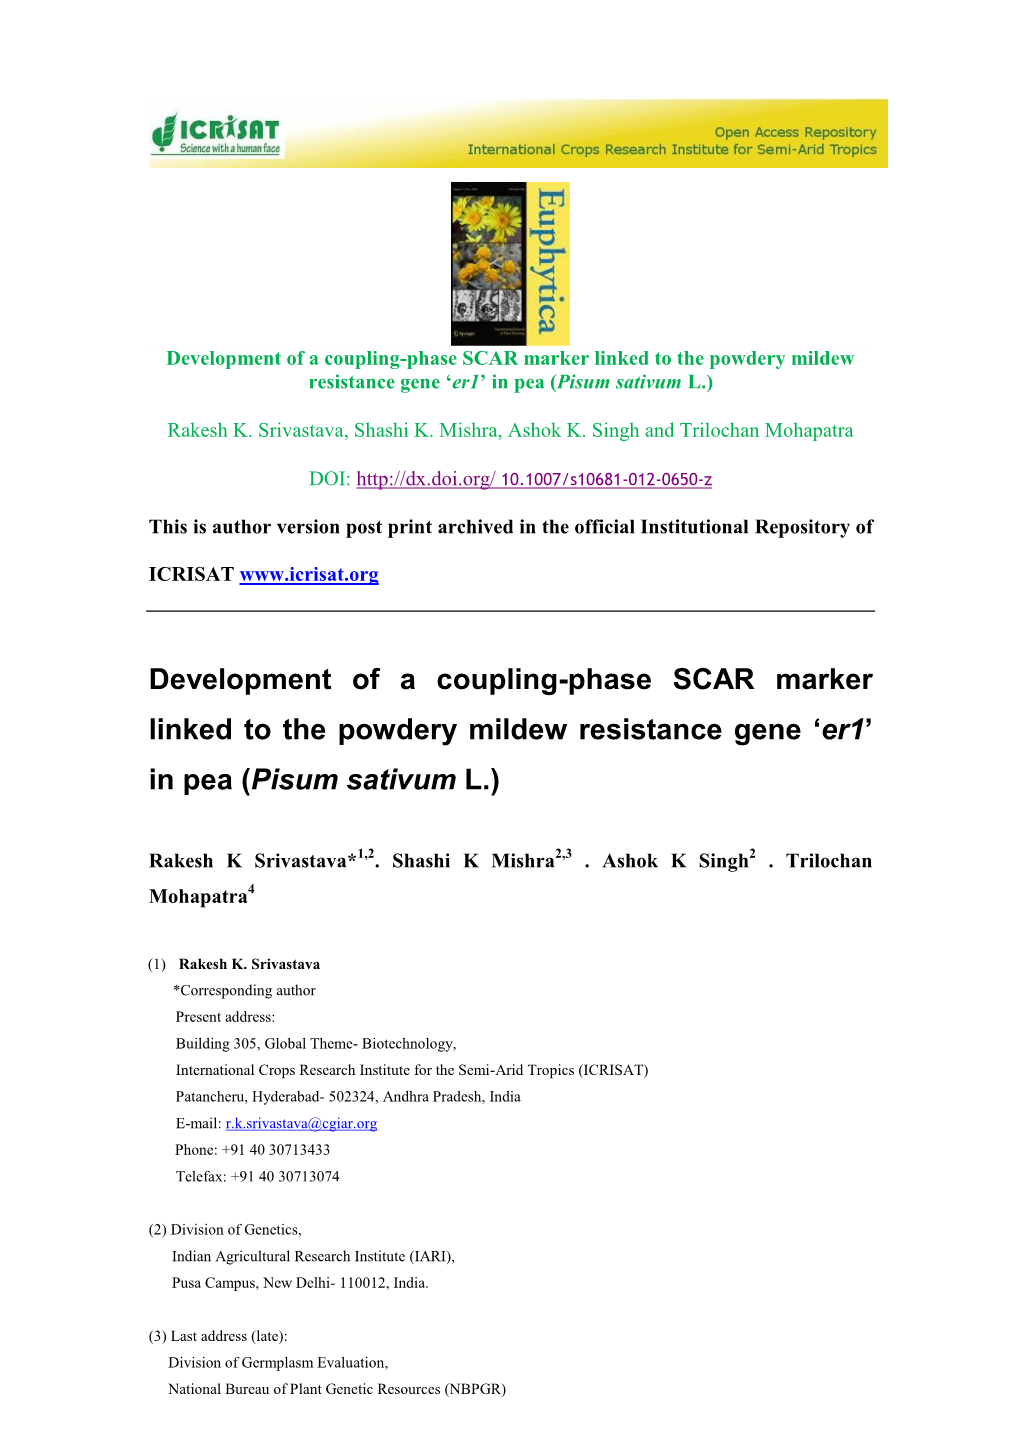 Development of Coupling Phase Marker In